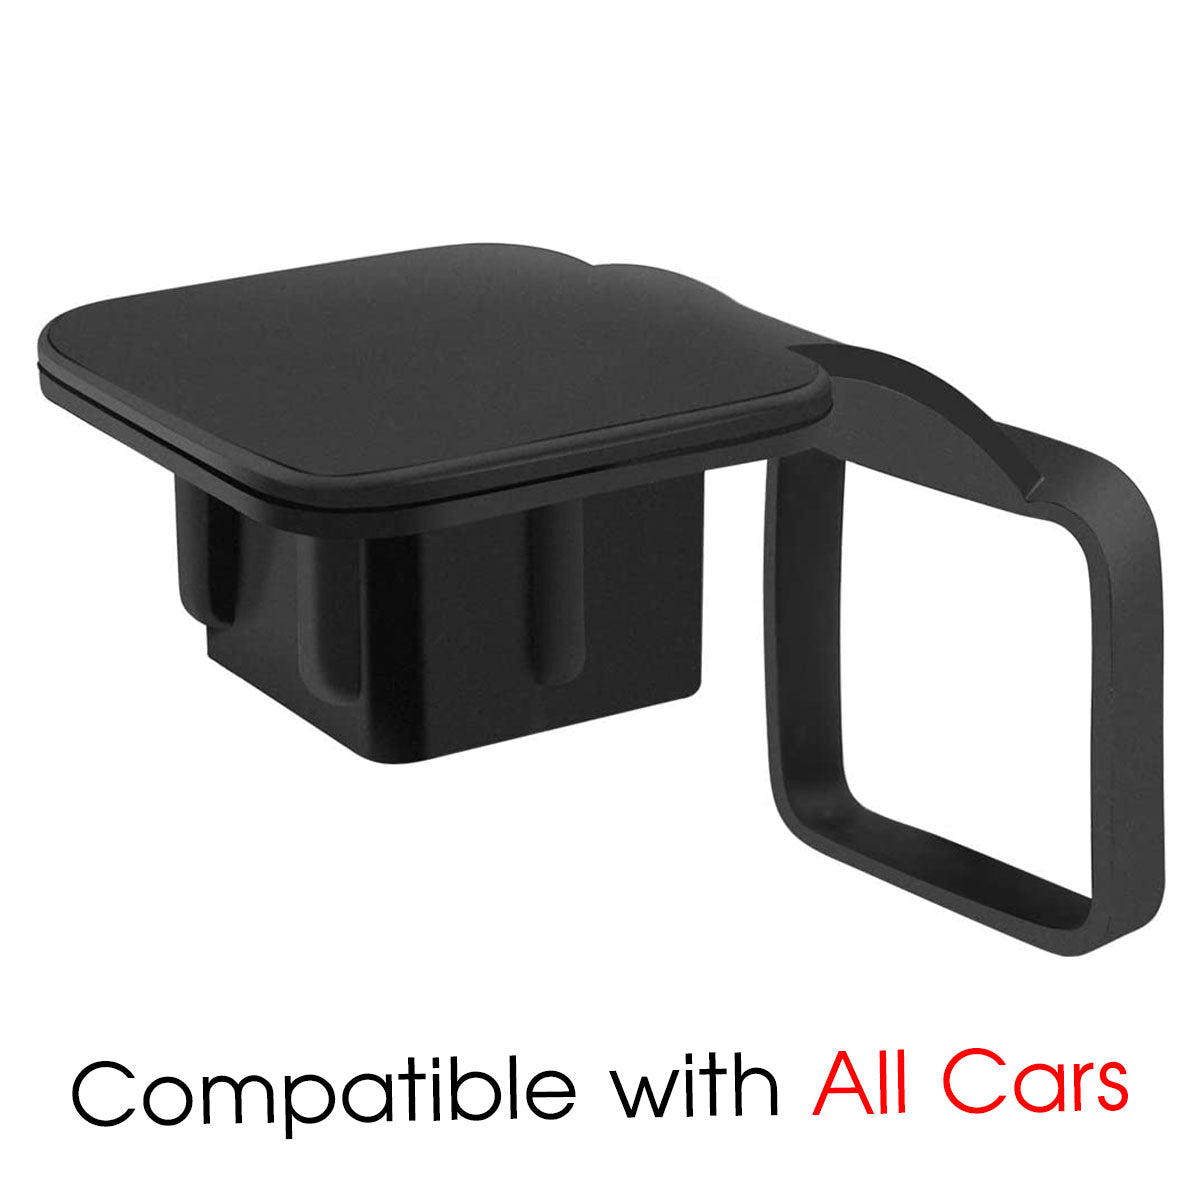 Trailer Hitch Cover, Custom For Your Cars, 2 Pack 2 Inch Receiver Hitch Plug Insert Tube Hitch Plug Trailer Hitch Plug Receiver Tube Cover, Car Accessories SA13987